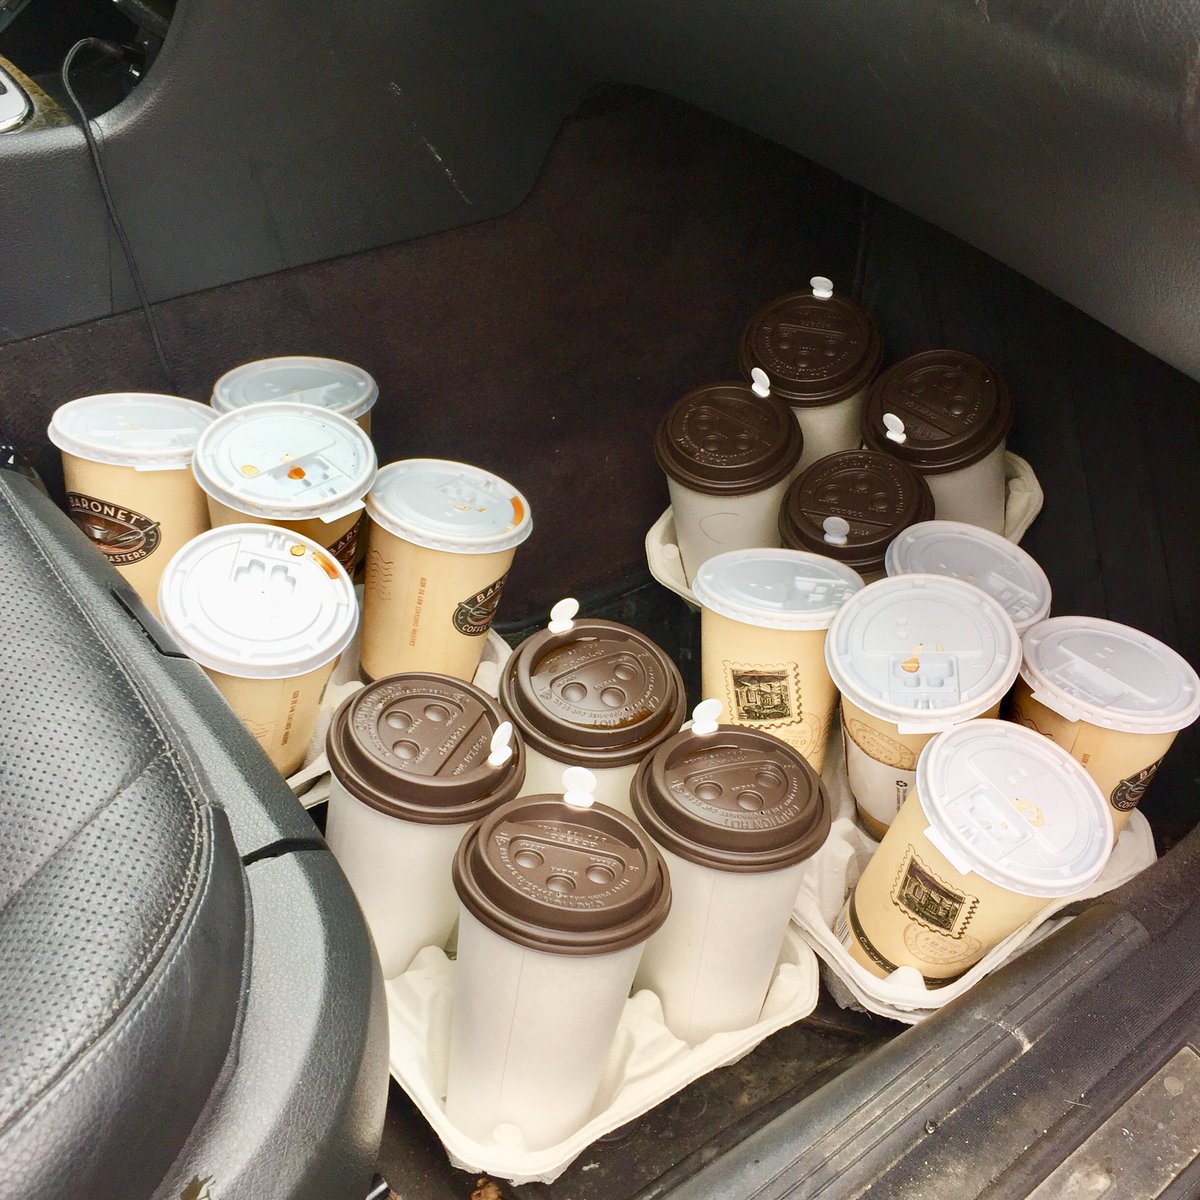 Commencing Day 16 Of Sheltering-in-Place. Coffee-run to gas-station complete. Eighteen large to-go. Put in car, drive them home, deloused, decontaminated, showered, and placed in fridge for use. Stay safe out there, outlaws and creative-gypsies.